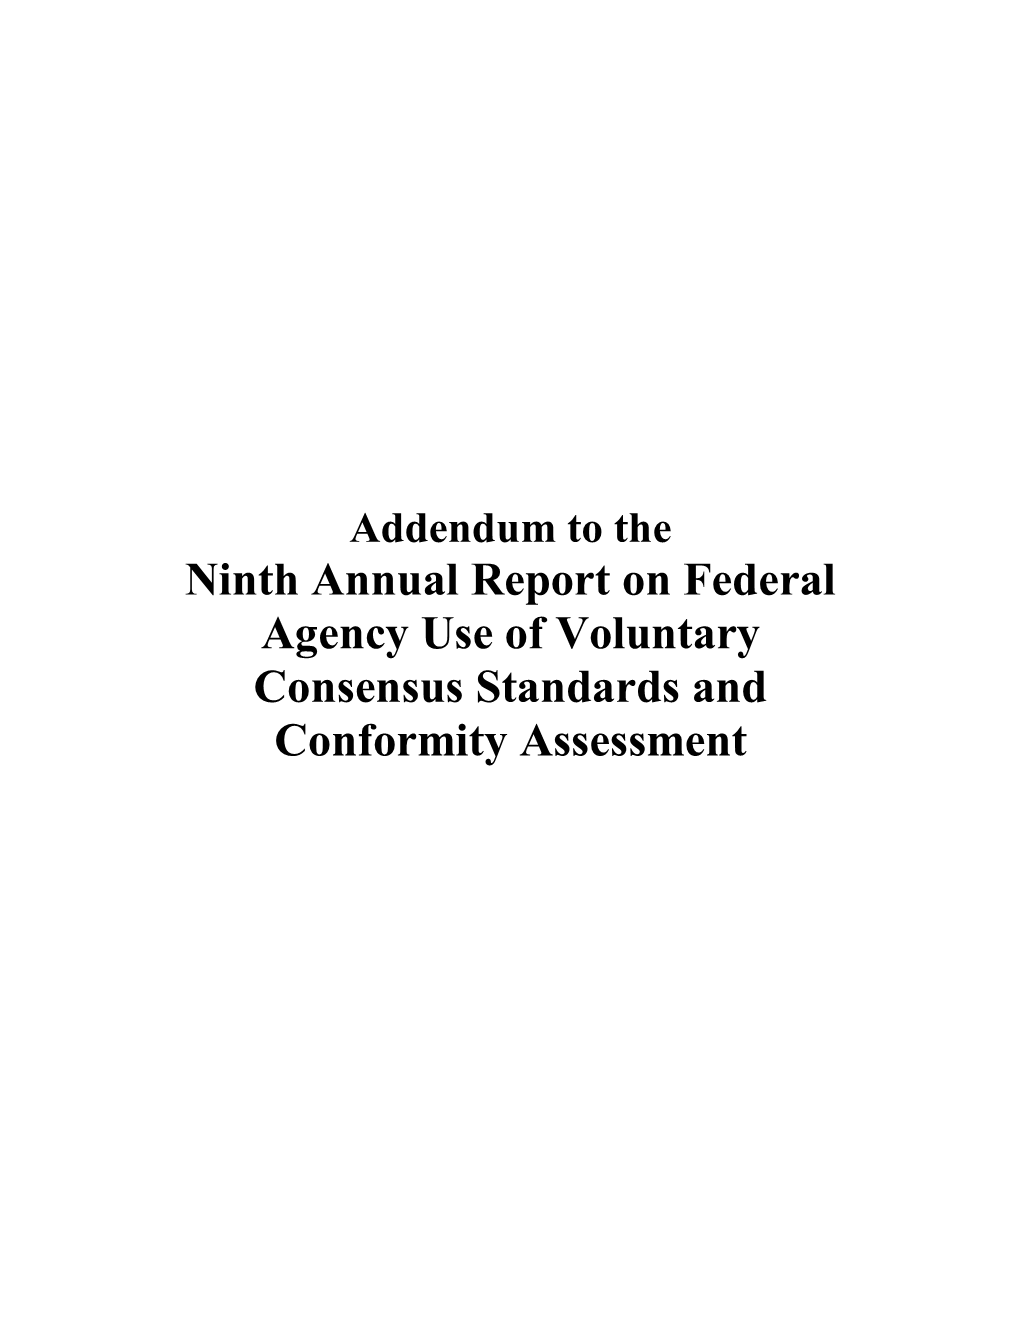 Addendum to the Ninth Annual Report on Federal Agency Use Of